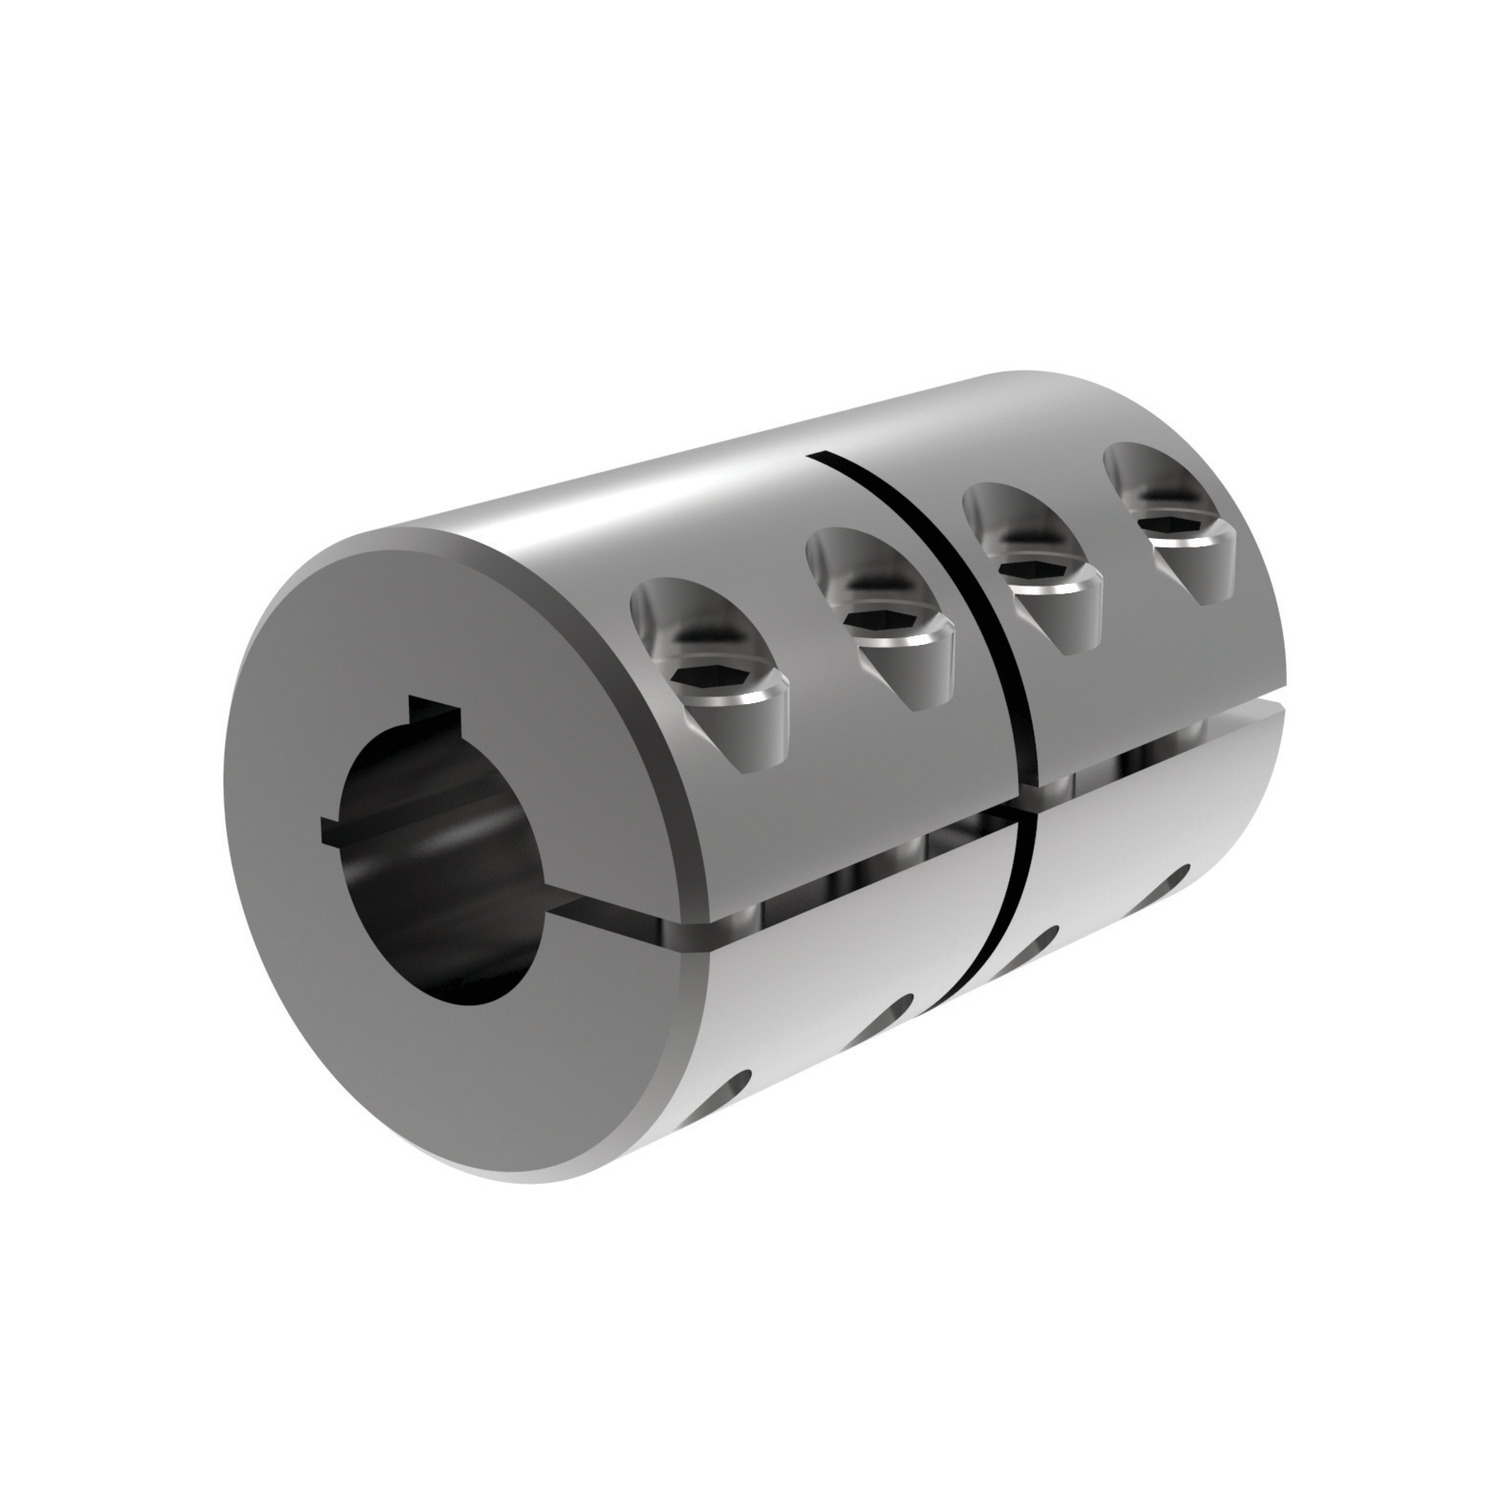 Product R3200, Rigid Shaft Couplings - One Piece steel & stainless, long / 